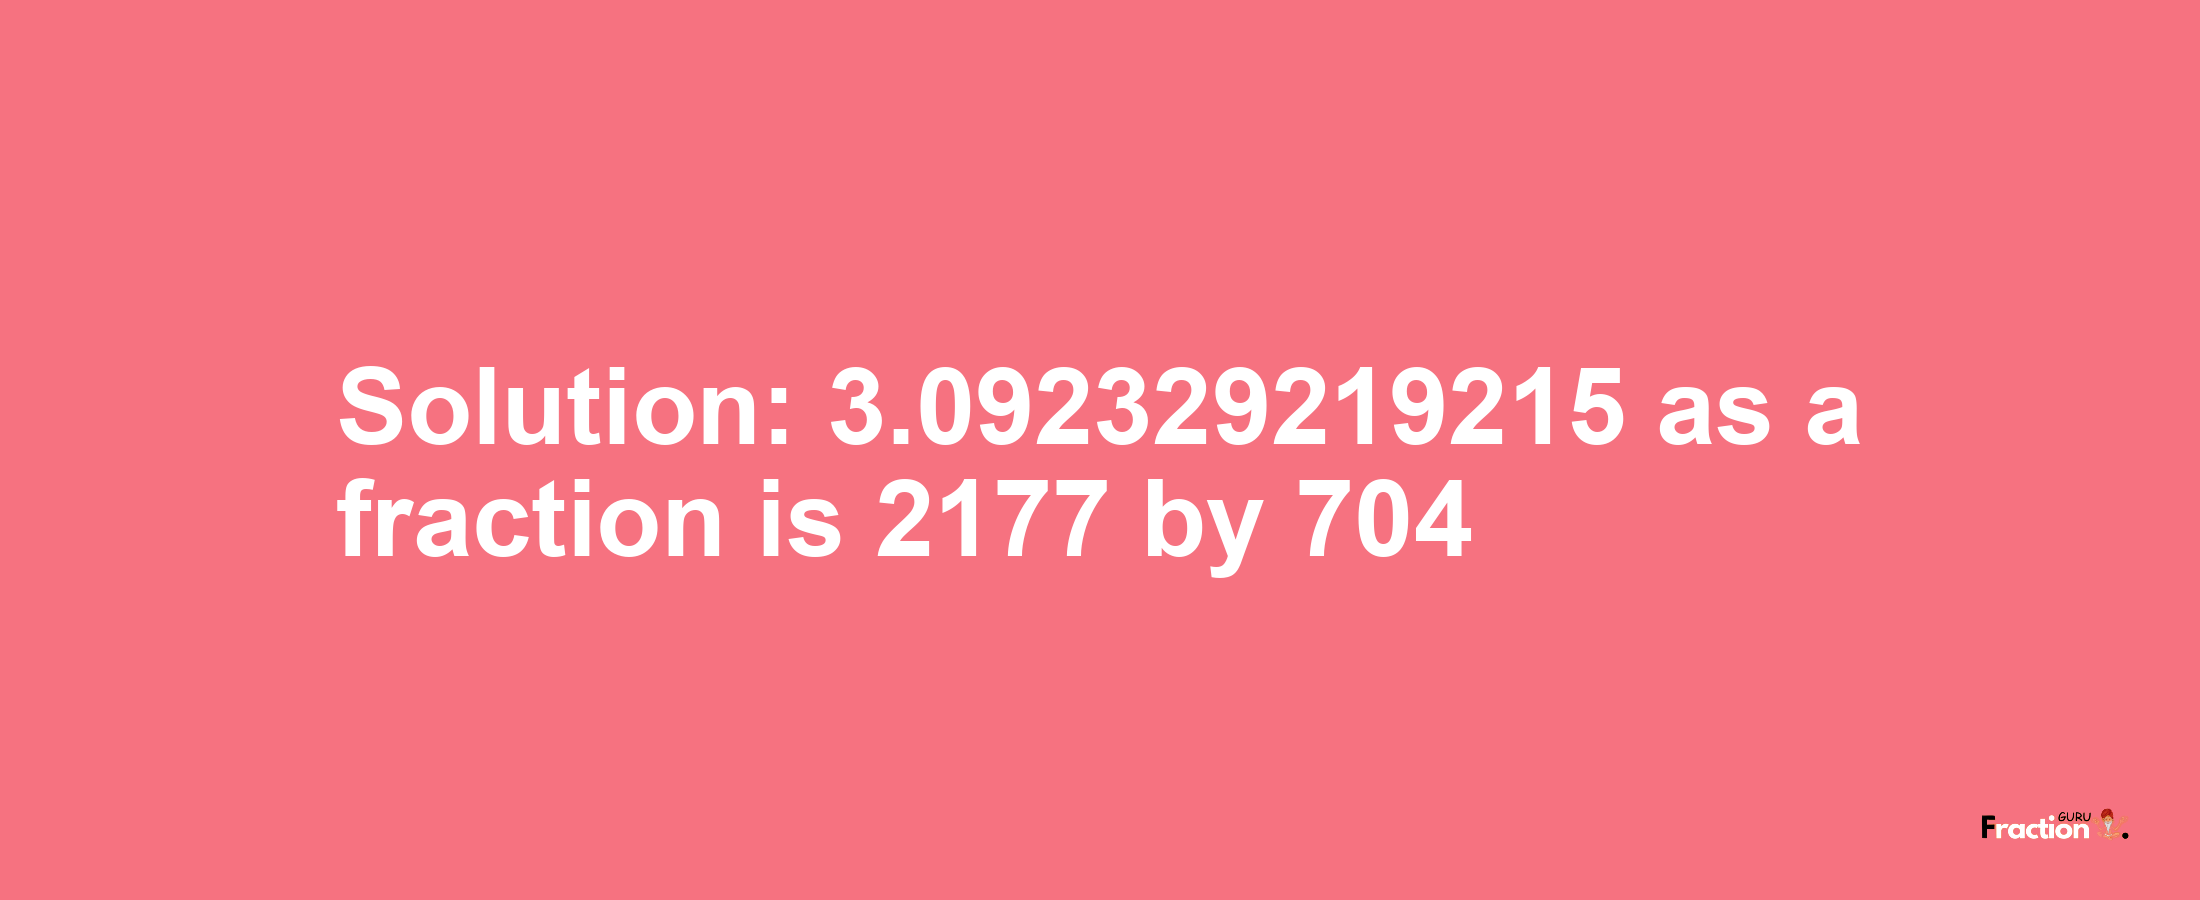 Solution:3.092329219215 as a fraction is 2177/704